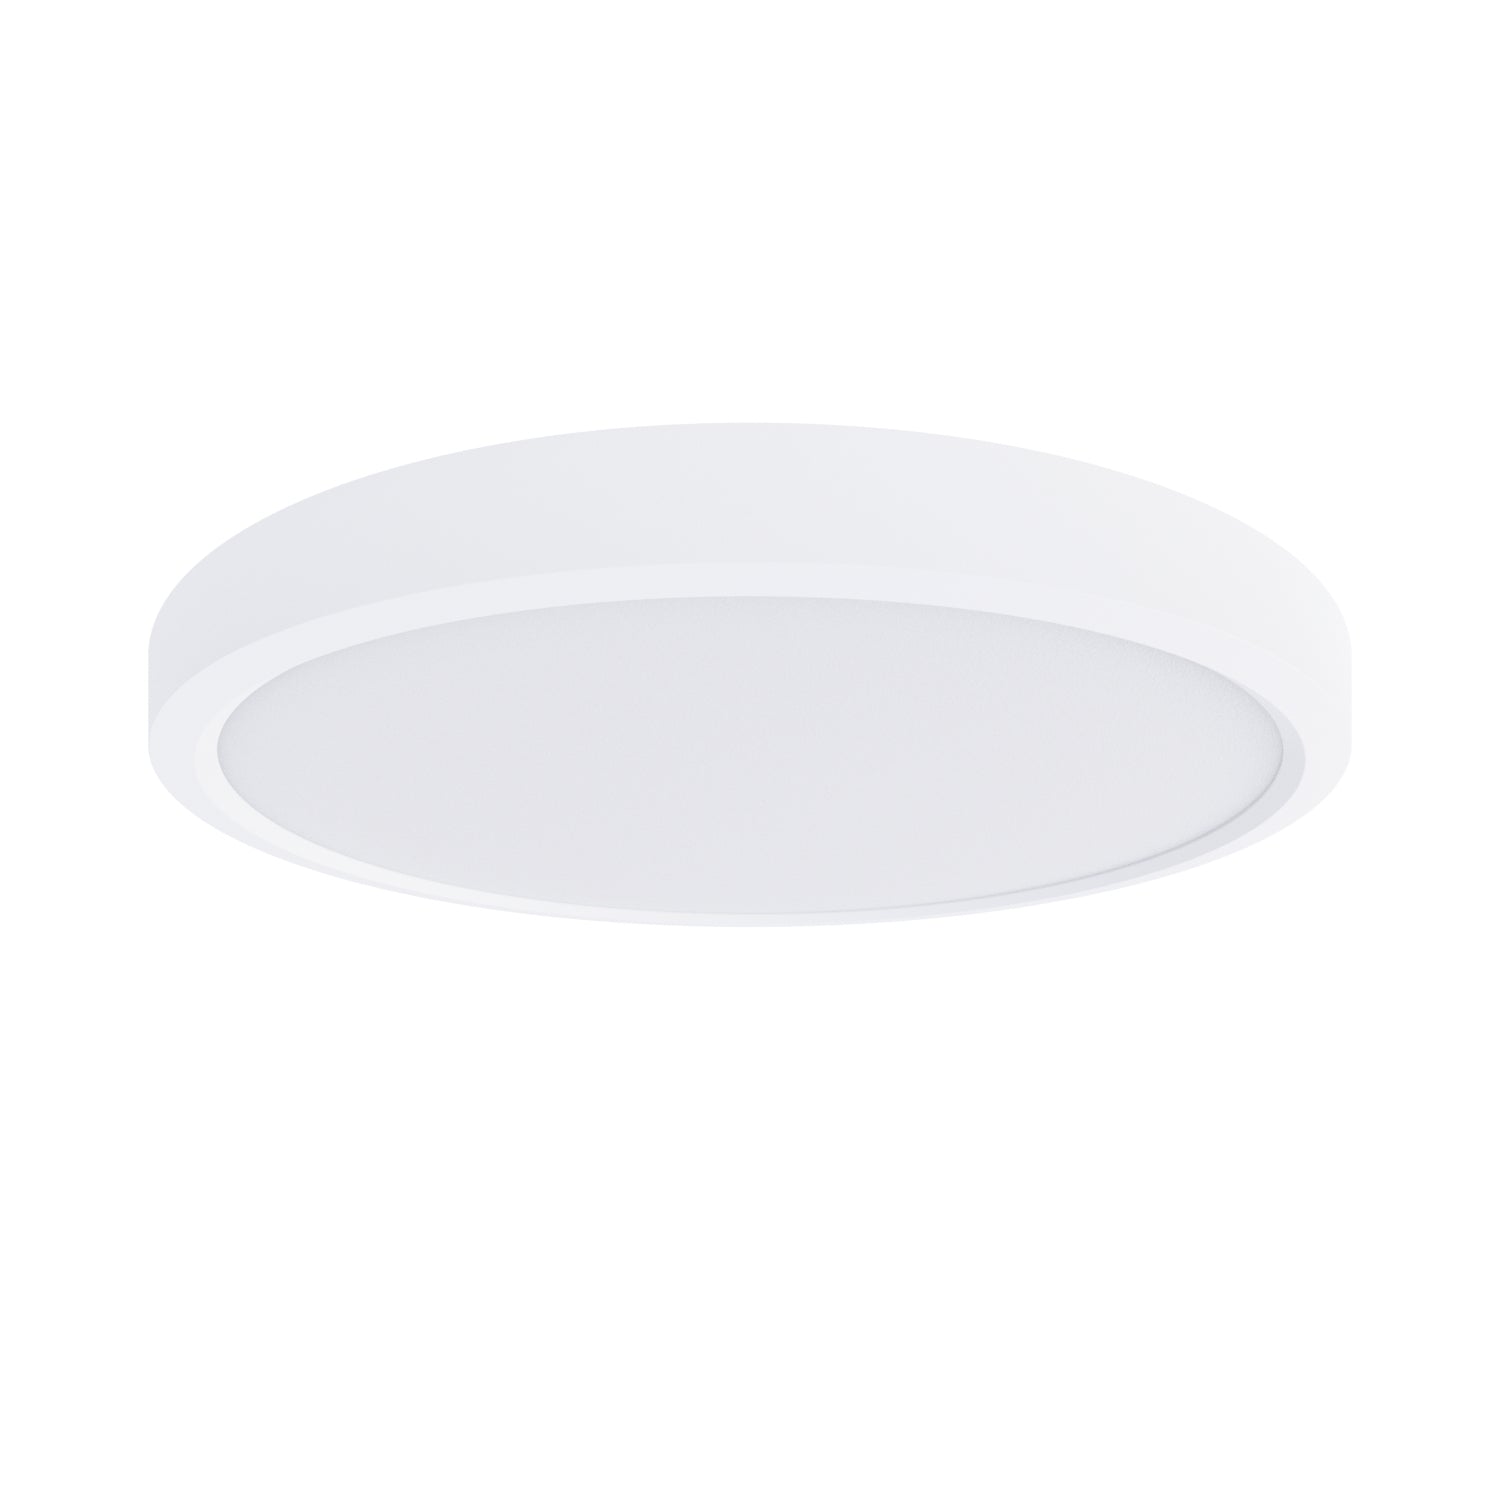 Round LED Surface Mount Downlights with Multiple CCT Options - Available in 4 Sizes and ETL/Energy Star Certified - Perfect for Residential and Commercial Spaces - Eco LED Lightings 